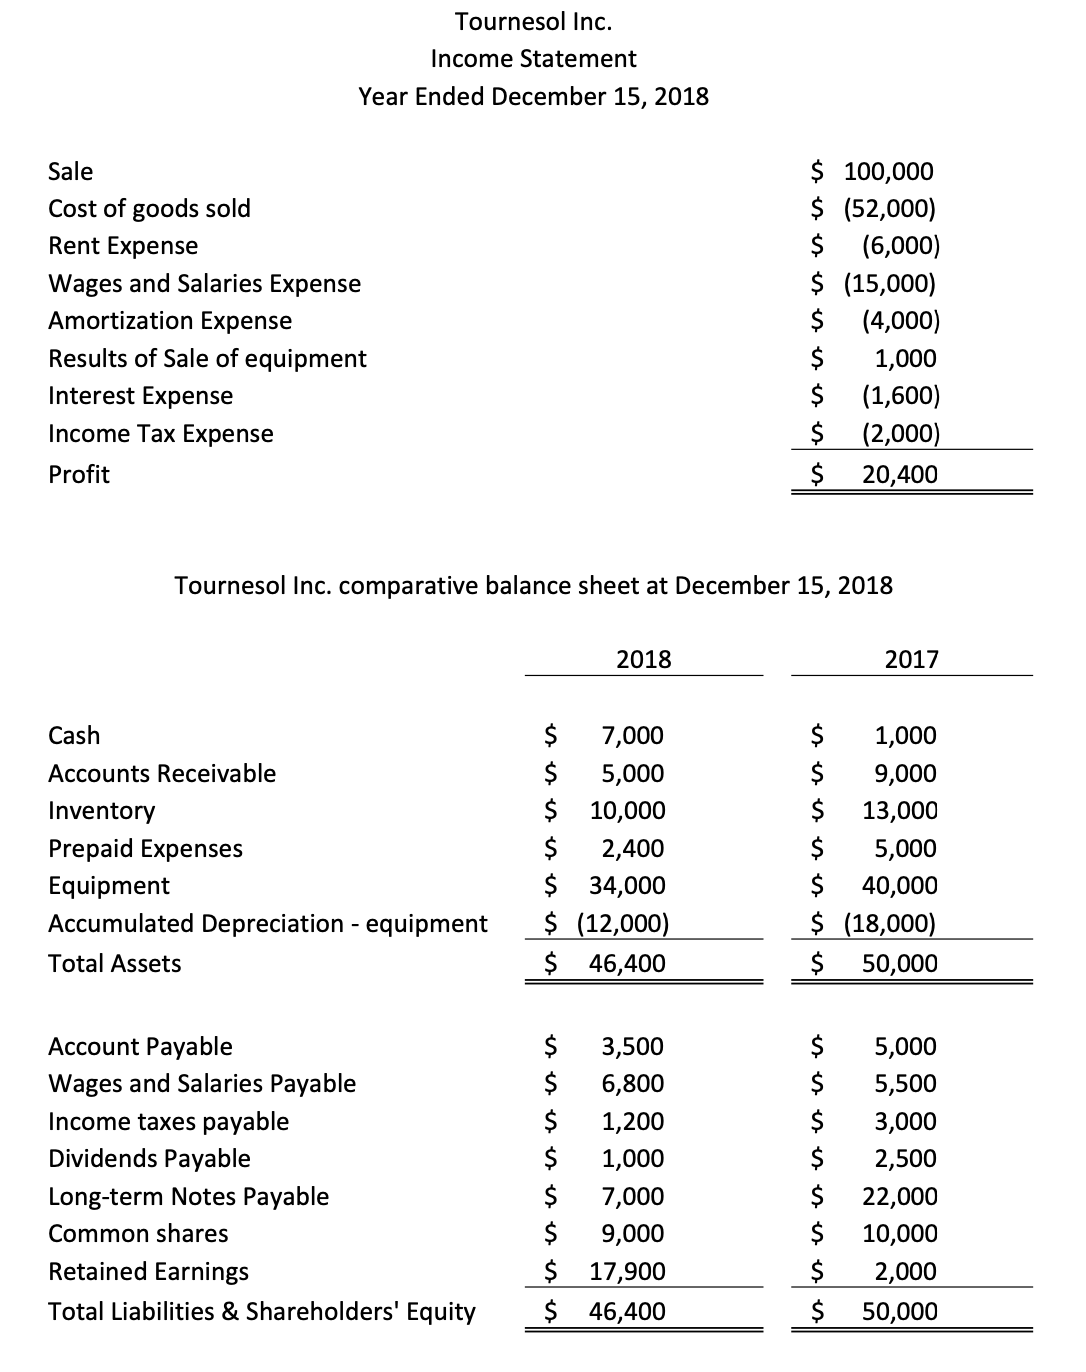 Tournesol Inc.
Income Statement
Year Ended December 15, 2018
Sale
Cost of goods sold
Rent Expense
Wages and Salaries Expense
Amortization Expense
Results of Sale of equipment
Interest Expense
Income Tax Expense
Profit
Cash
Accounts Receivable
Inventory
Prepaid Expenses
Tournesol Inc. comparative balance sheet at December 15, 2018
Equipment
Accumulated Depreciation - equipment
Total Assets
Account Payable
Wages and Salaries Payable
Income taxes payable
Dividends Payable
Long-term Notes Payable
Common shares
Retained Earnings
Total Liabilities & Shareholders' Equity
$
$
$
2018
$
$
$
$
$
$
$
$
7,000
5,000
10,000
$
2,400
$
34,000
$ (12,000)
$ 46,400
$ 100,000
$
(52,000)
$
$
$
$
$
$
$
3,500
6,800
1,200
1,000
7,000
9,000
17,900
46,400
(6,000)
(15,000)
(4,000)
1,000
(1,600)
(2,000)
20,400
2017
$
1,000
$ 9,000
$ 13,000
$ 5,000
$ 40,000
$ (18,000)
$ 50,000
$ 5,000
$
5,500
3,000
$ 2,500
$
22,000
$
10,000
$
2,000
$
50,000